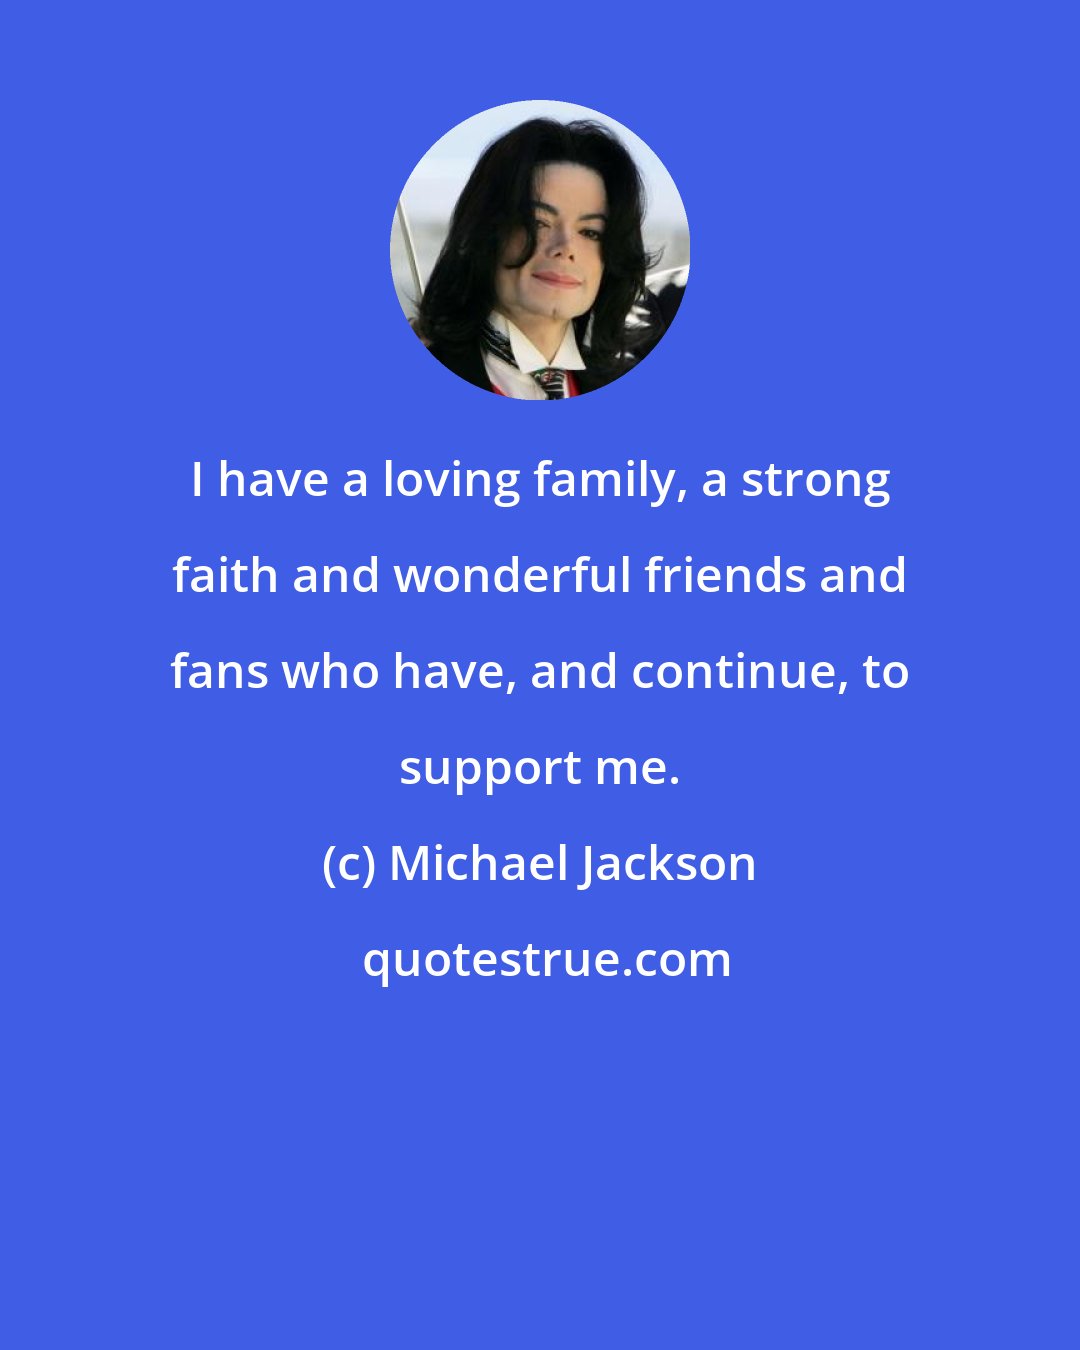 Michael Jackson: I have a loving family, a strong faith and wonderful friends and fans who have, and continue, to support me.